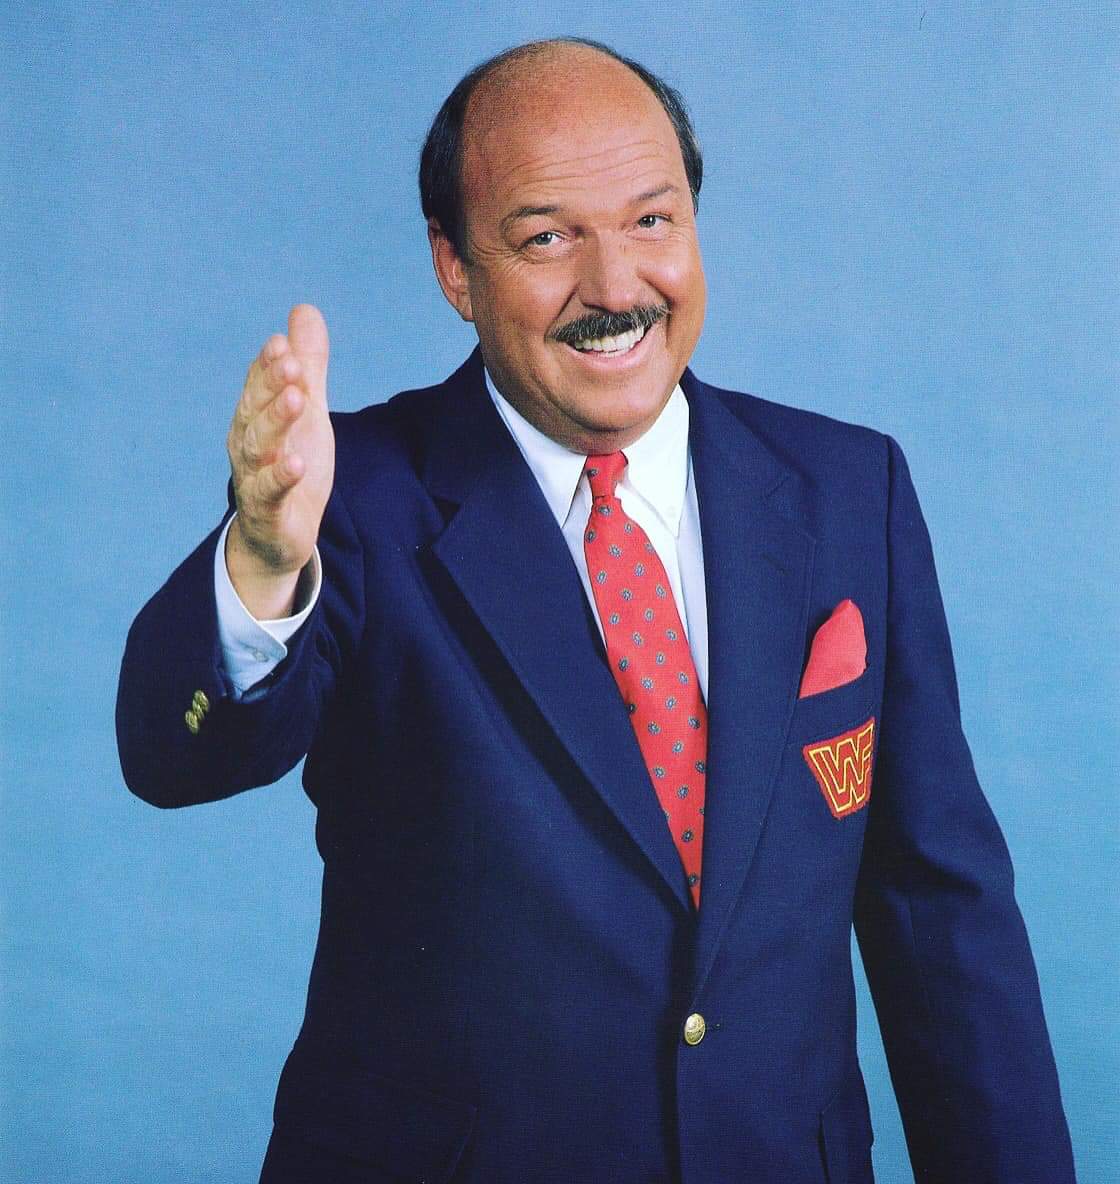 Another legend gone. #MeanGeneOkerlund was such a huge part of my childhood. May you rest in power, cutting awesome after life promos with all the other superstars.